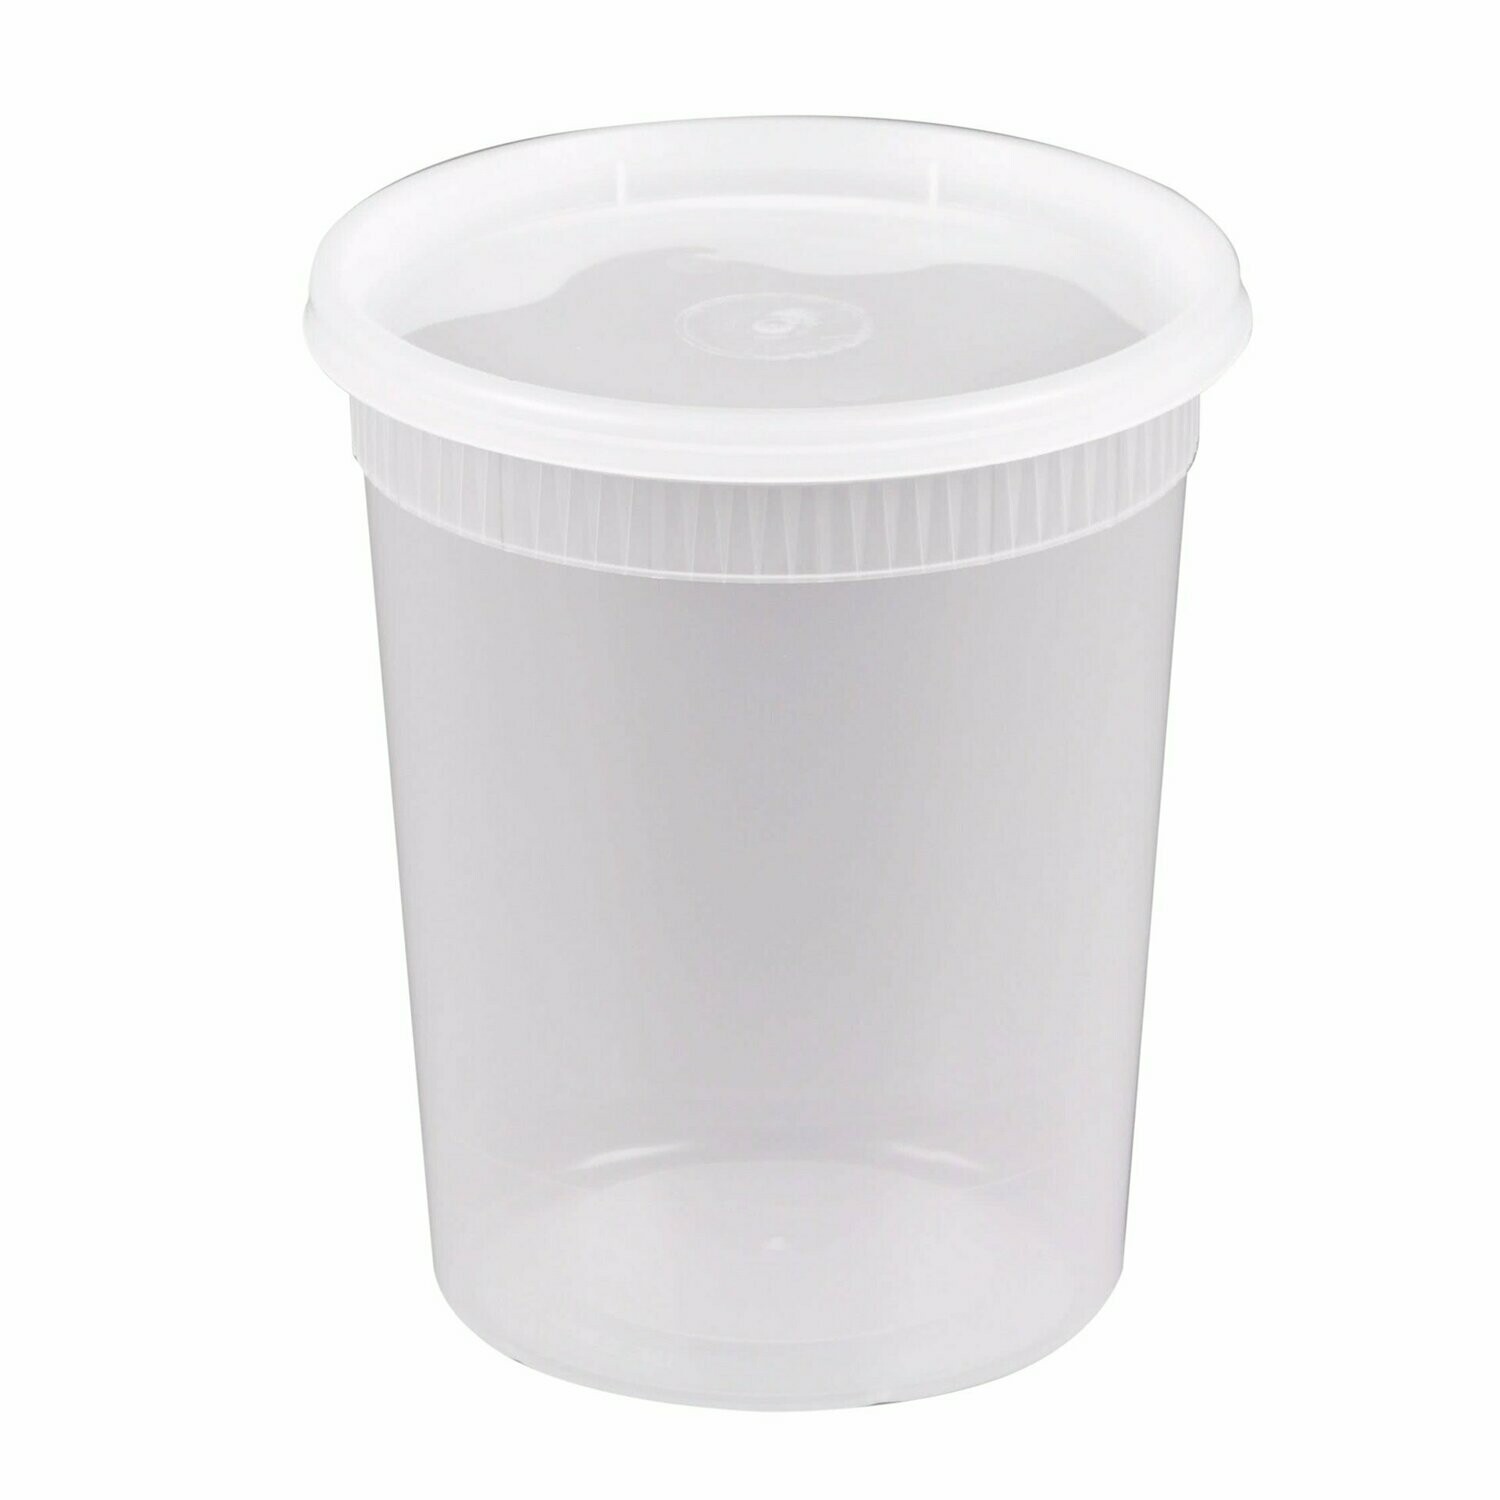 Plastic Soup Containers 32oz #S32 (Made in US)